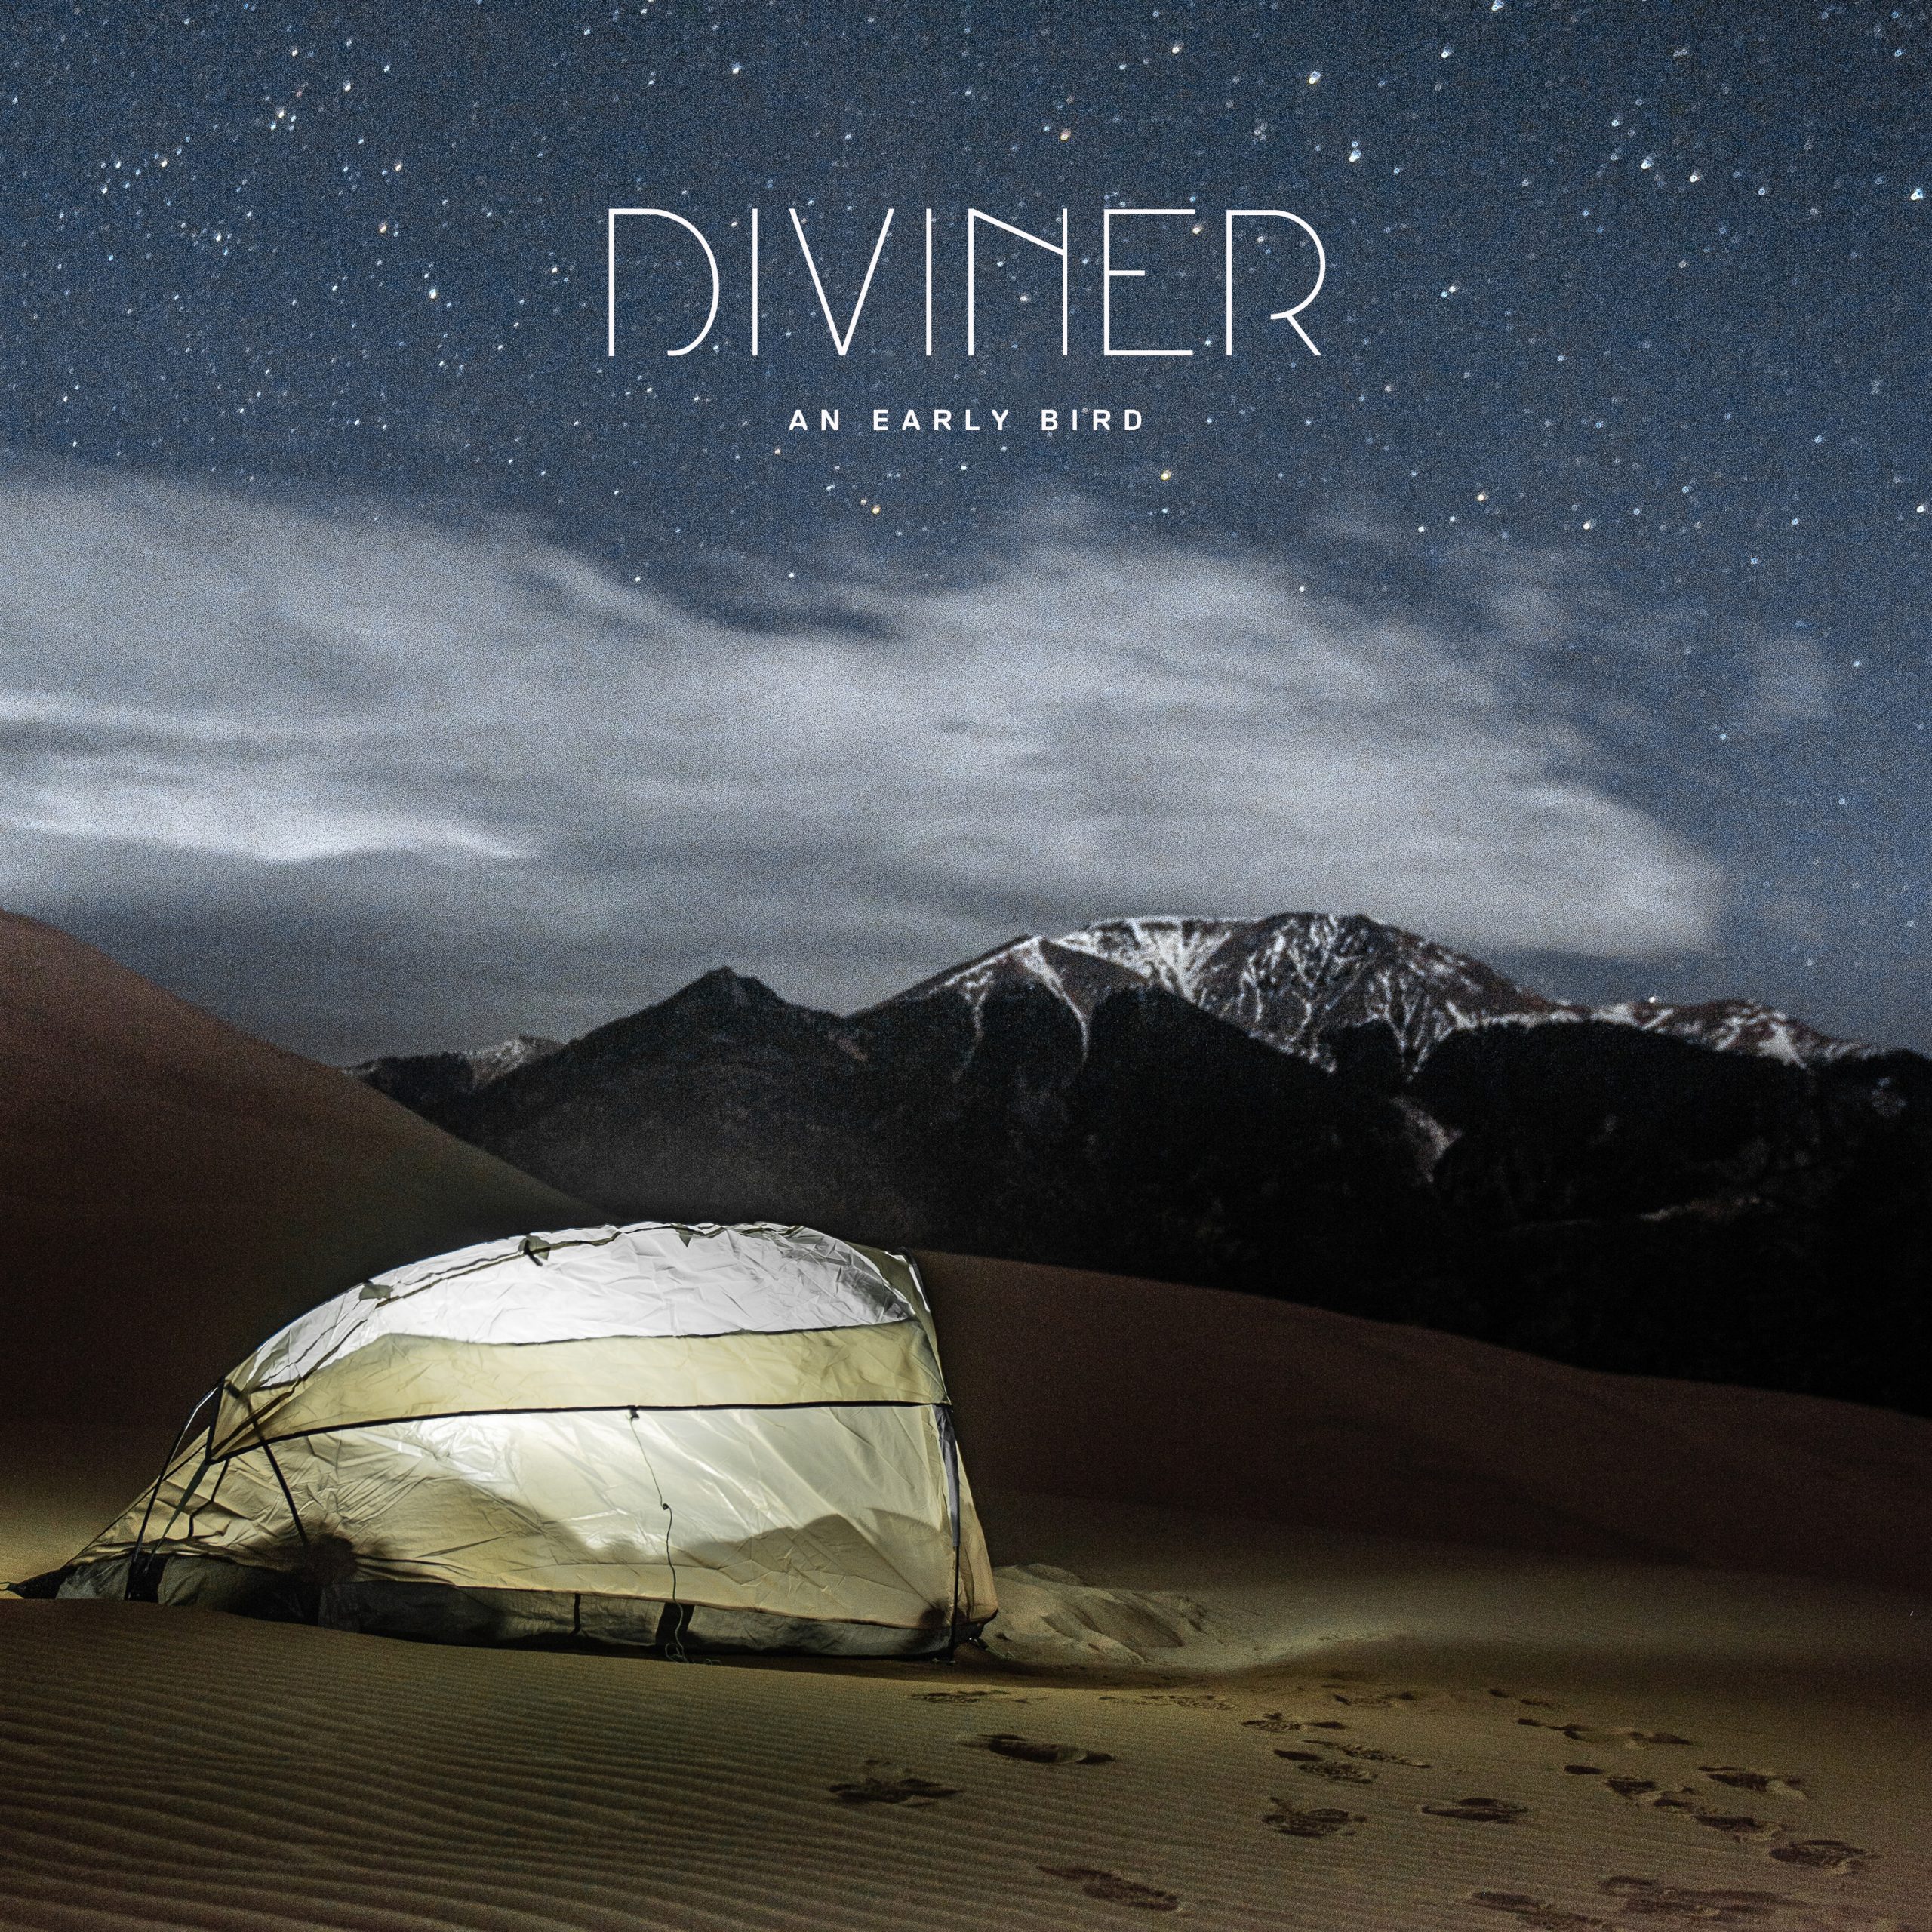 An Early Bird - Diviner (Album) - Greywood Records